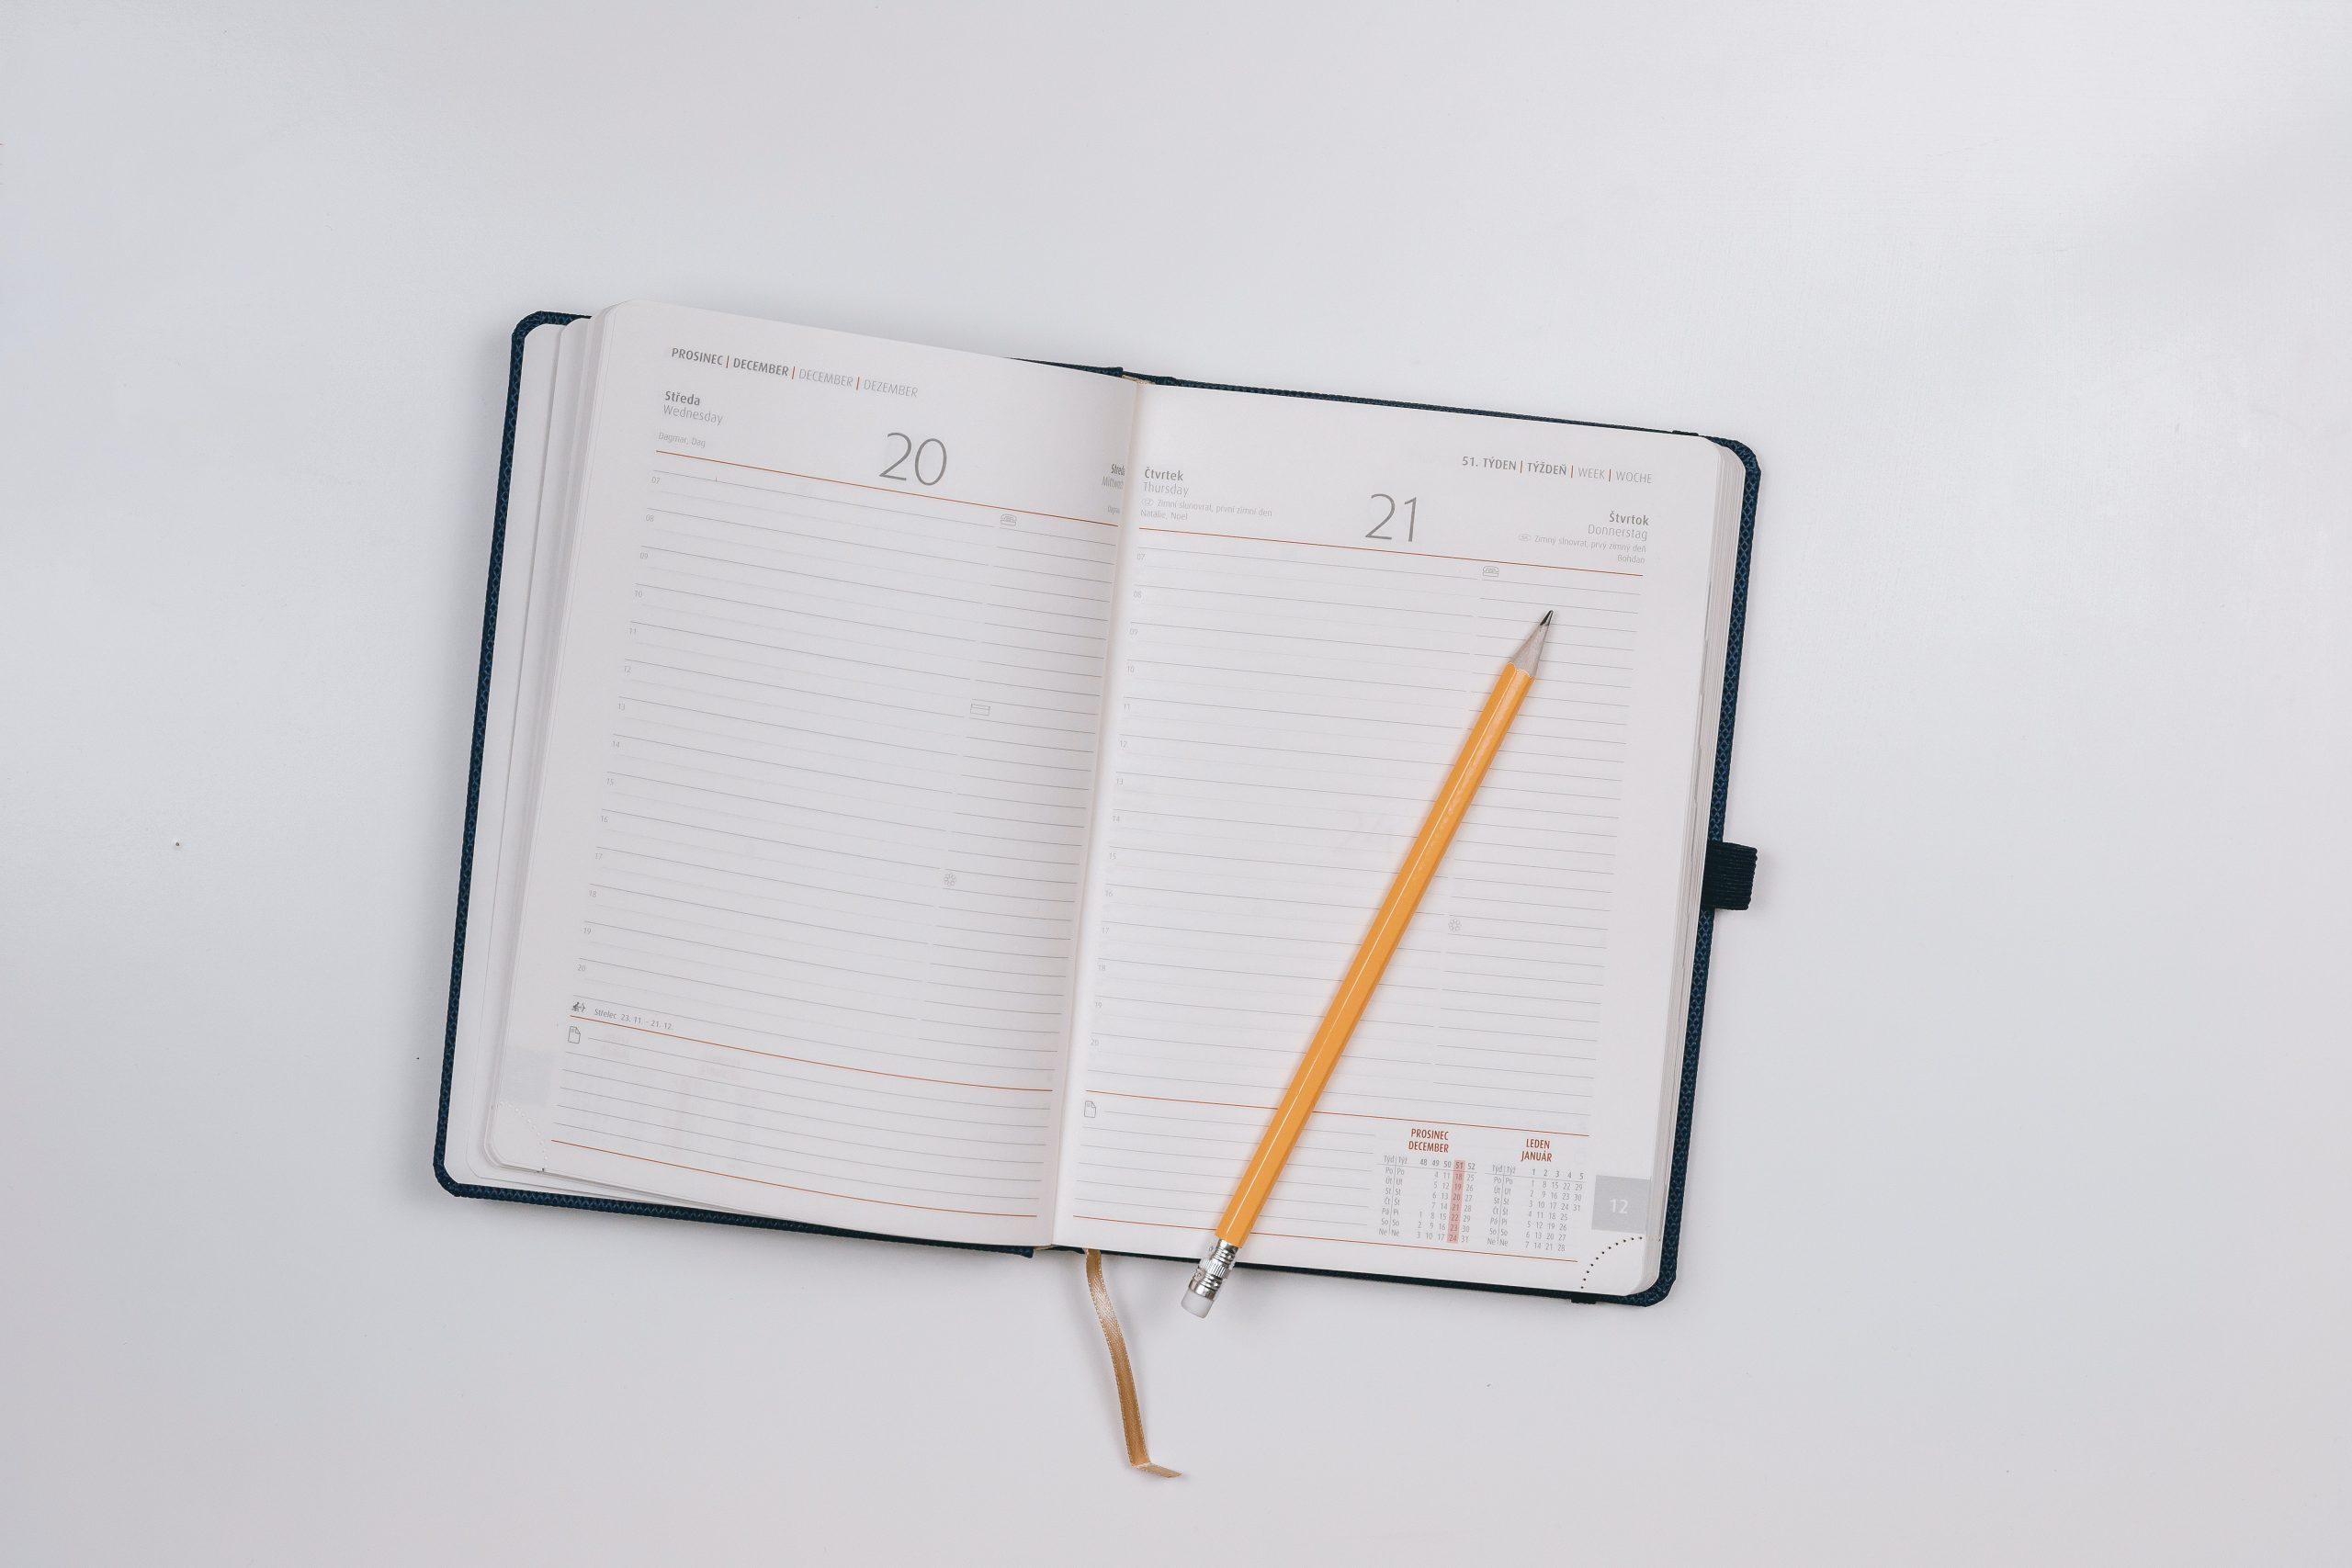 An open agenda notebook with pencil